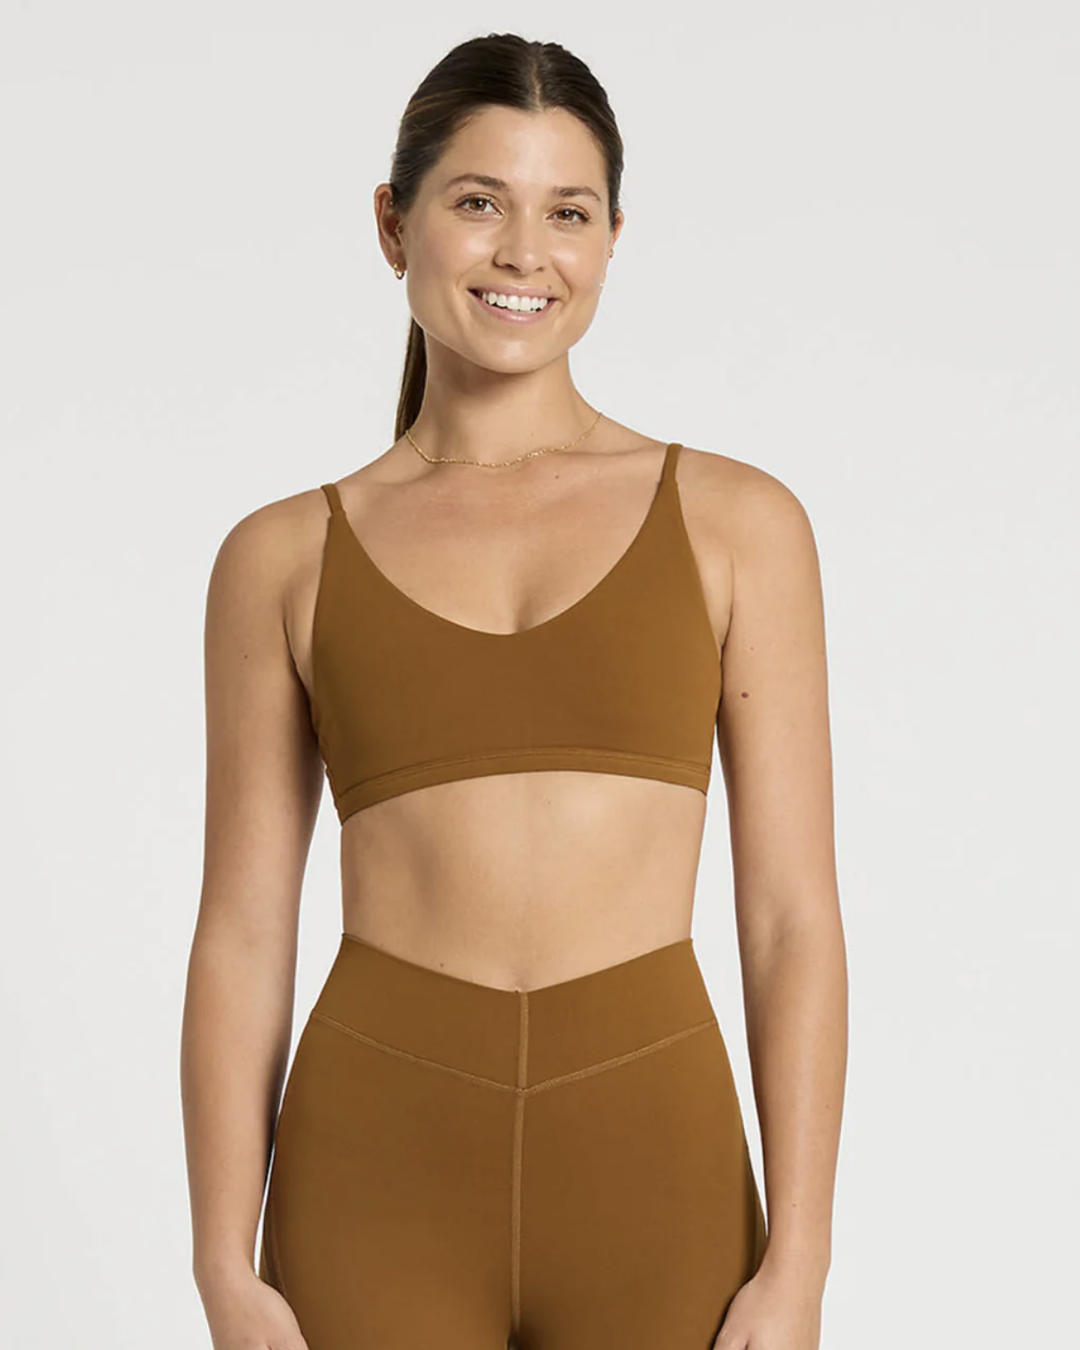 In Motion V Bralette - Toast Activewear by Nimble - Prae Wellness